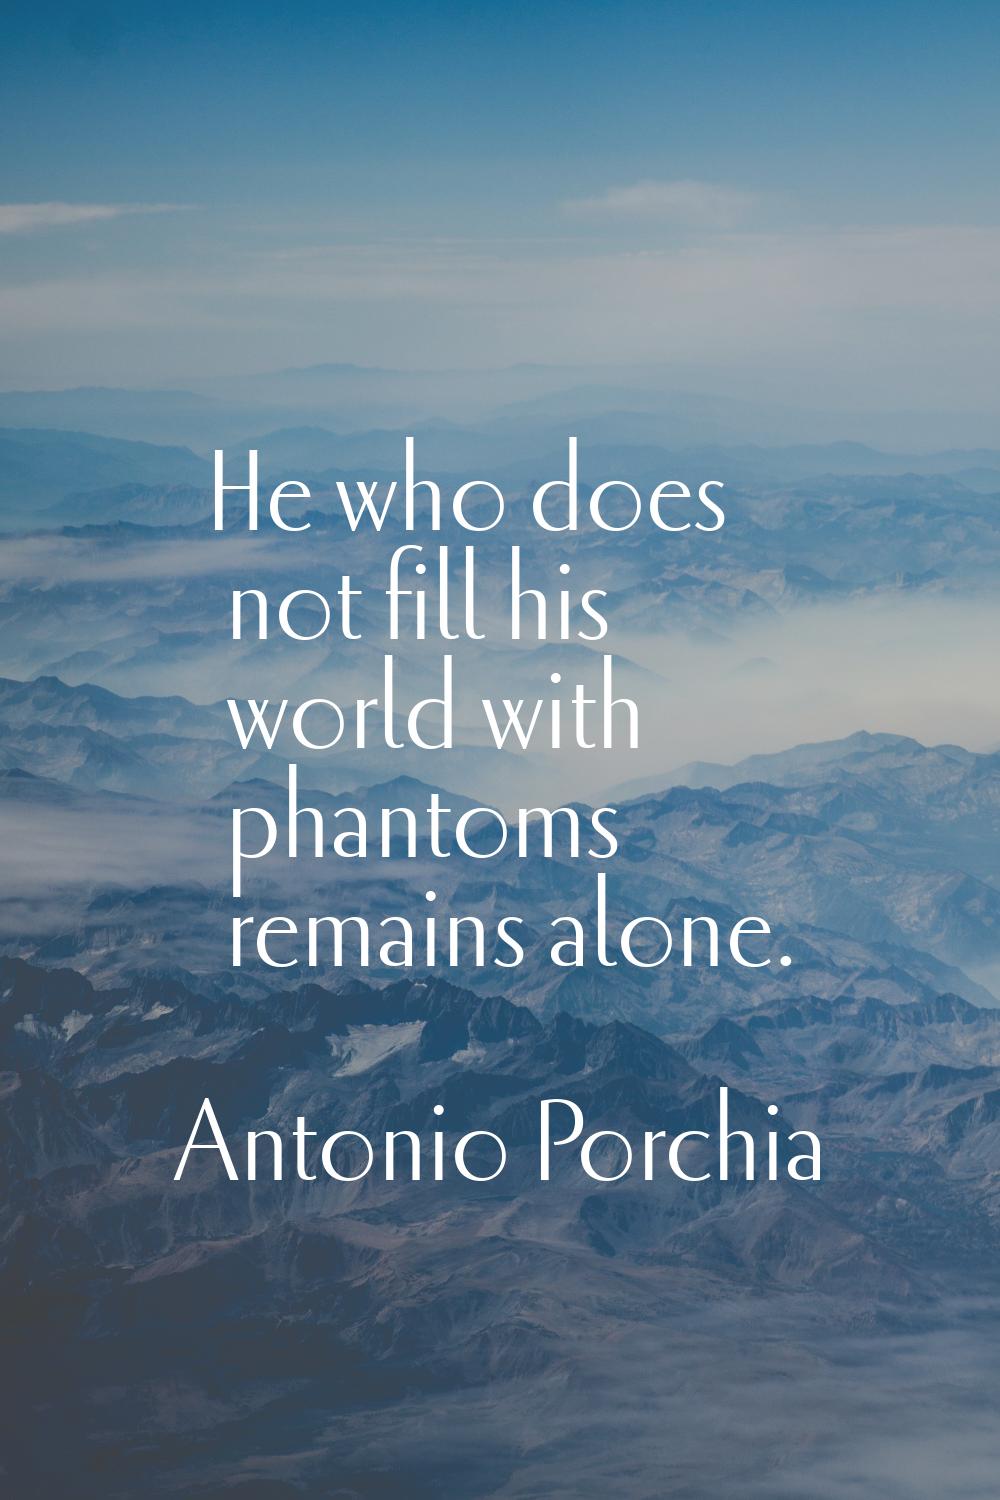 He who does not fill his world with phantoms remains alone.